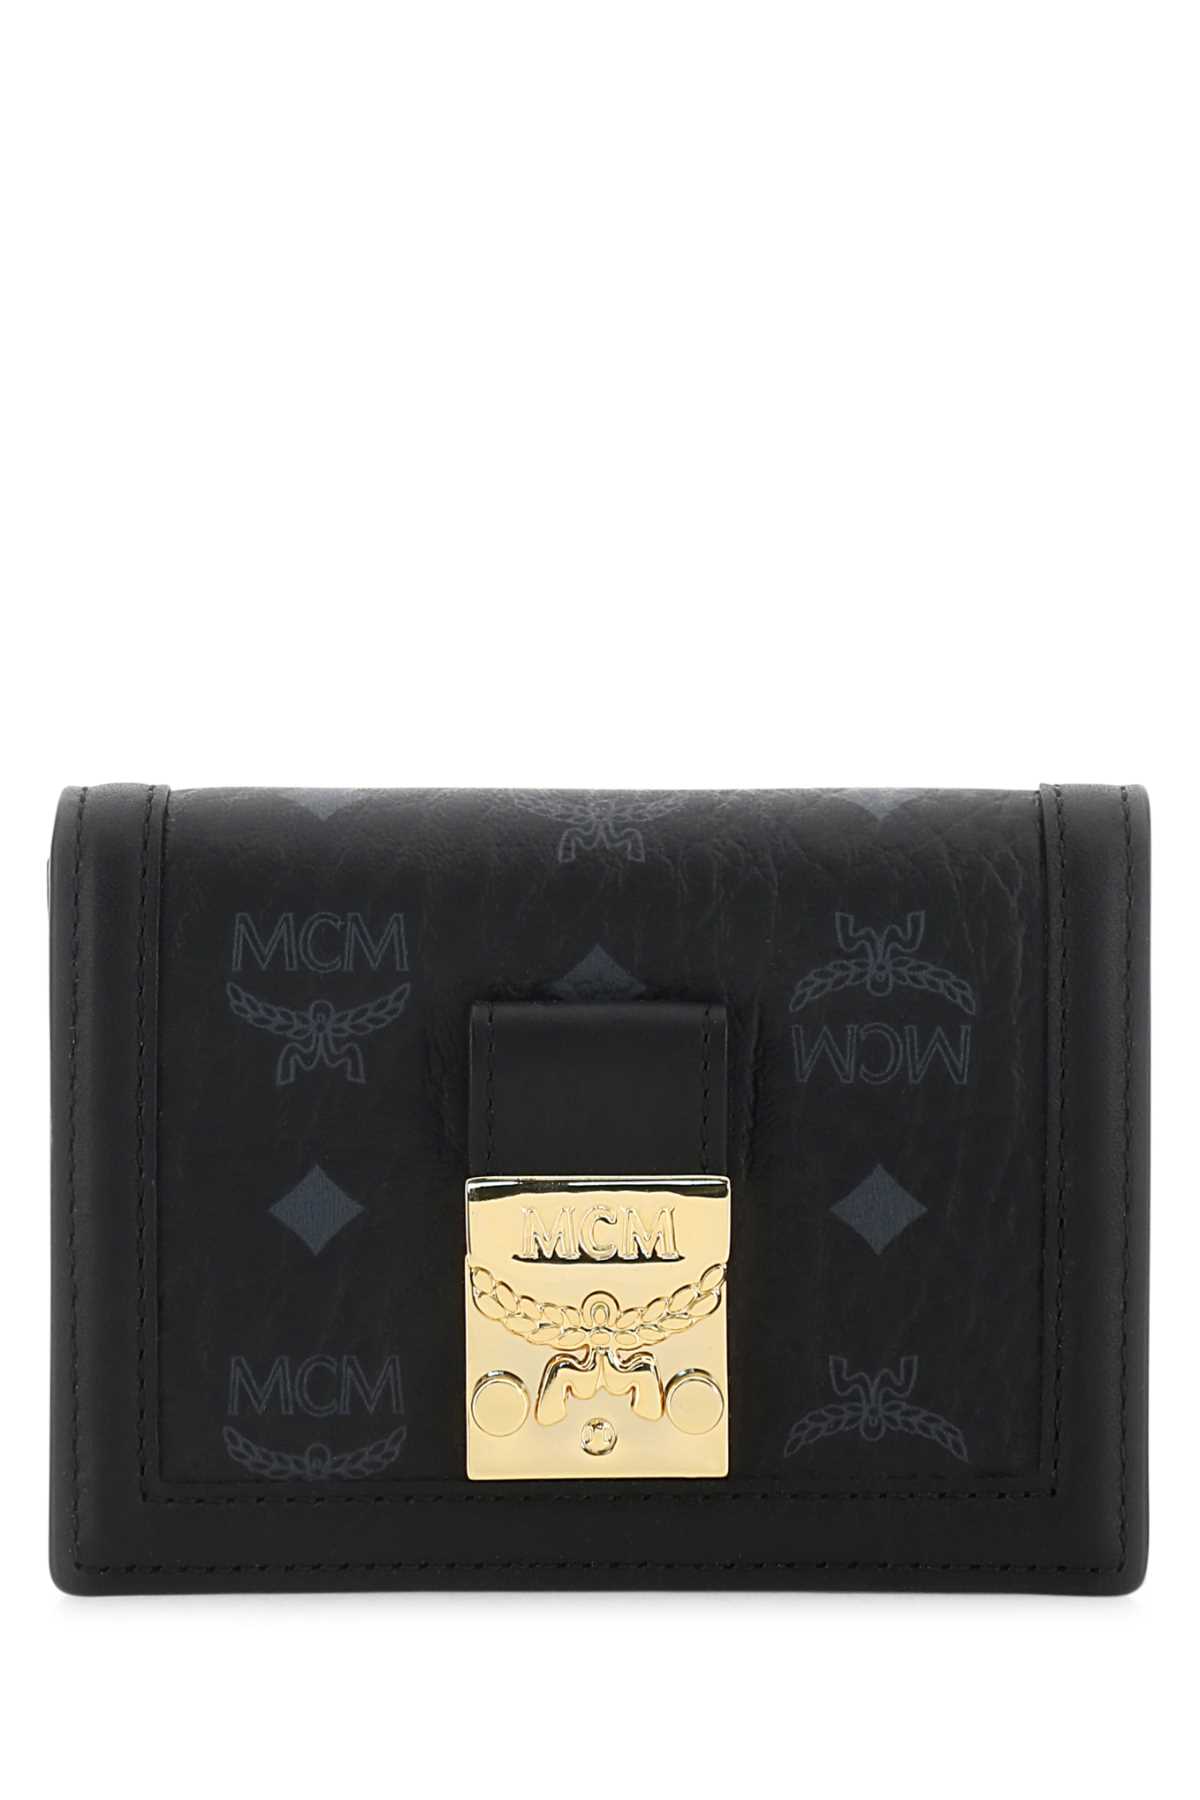 MCM Printed Canvas Tracy Coin Purse